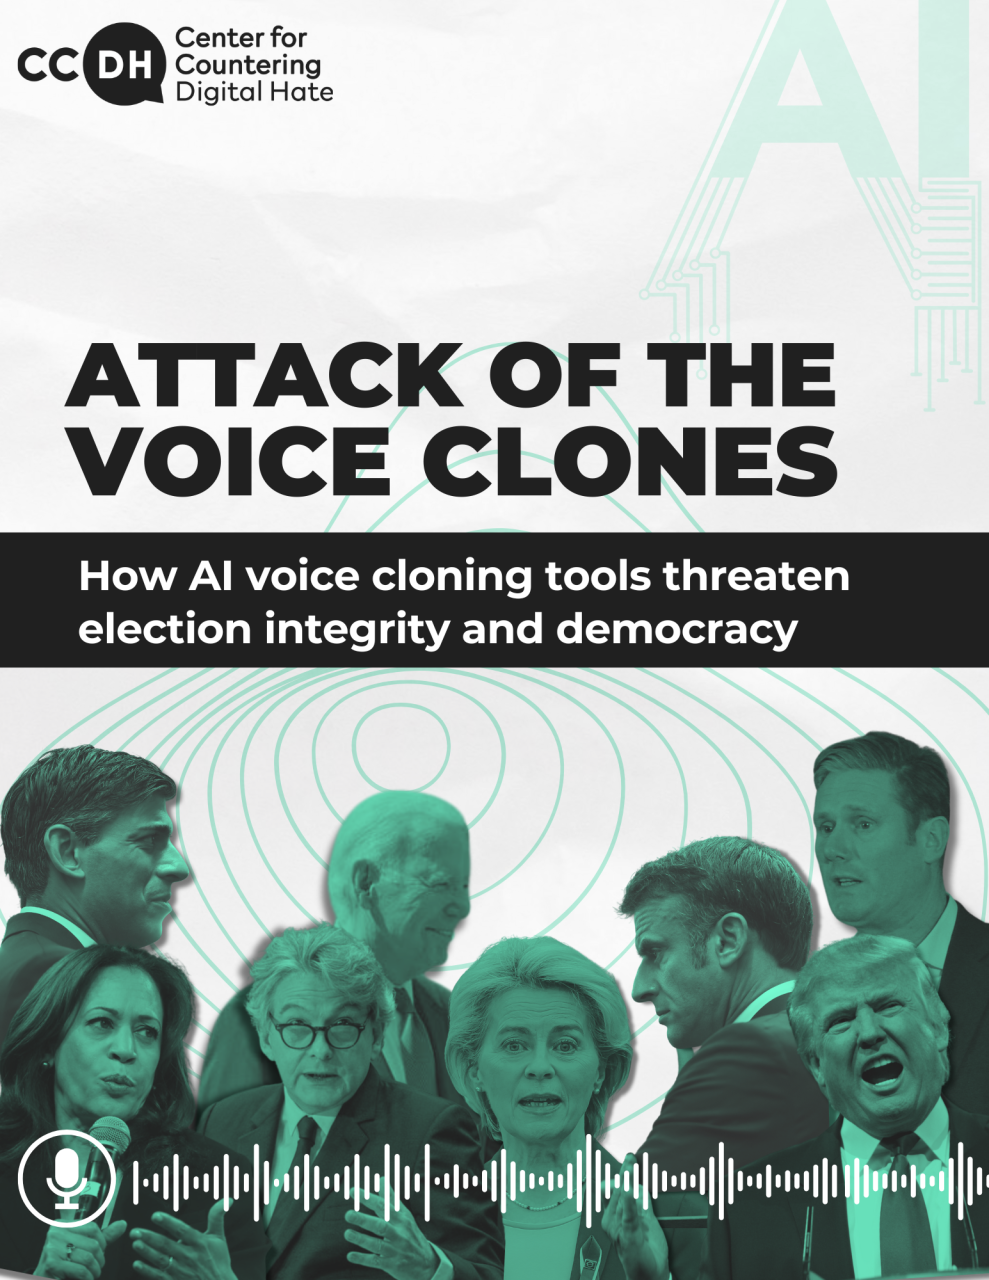 Attack of the voice clones cover featuring headshots of 8 well-known politicians